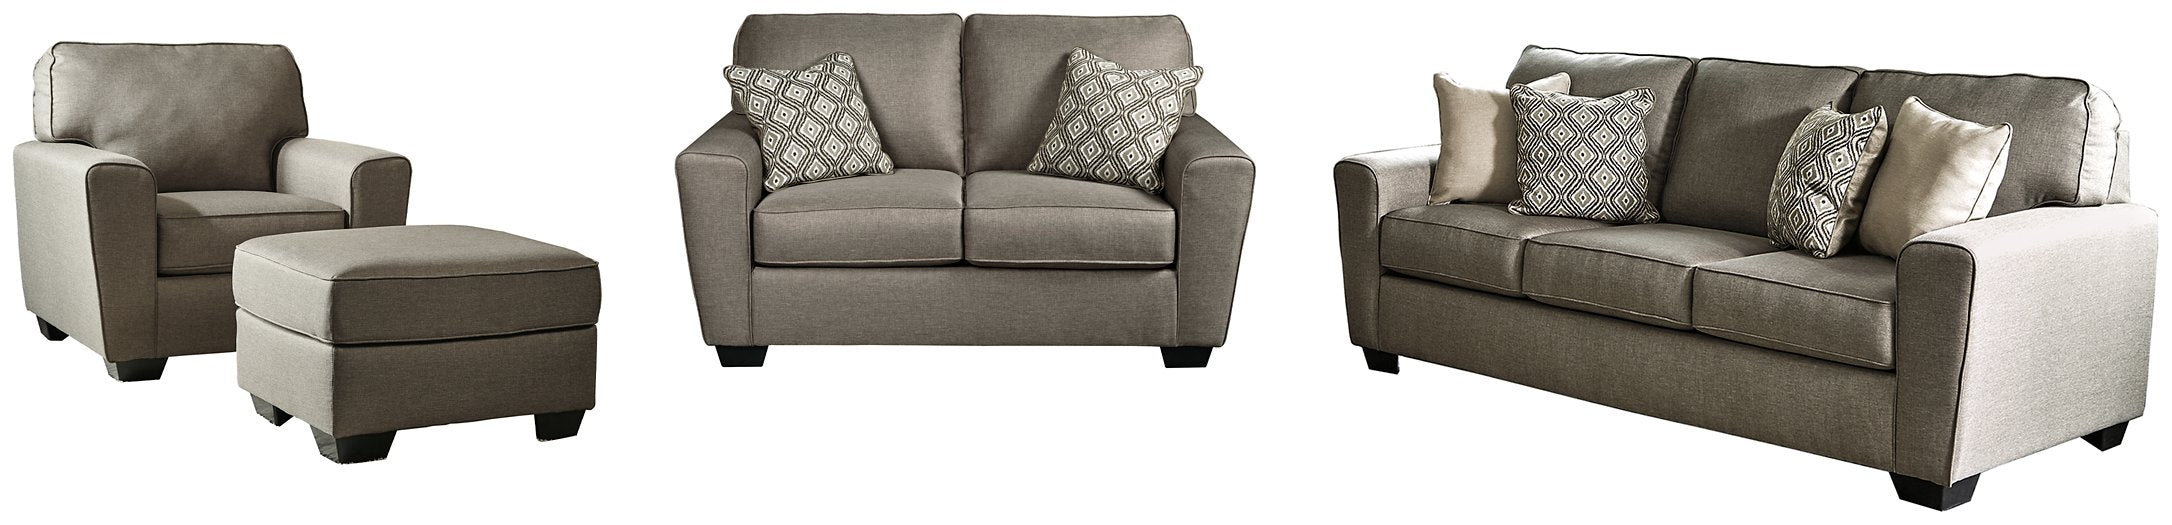 Calicho Upholstery Package